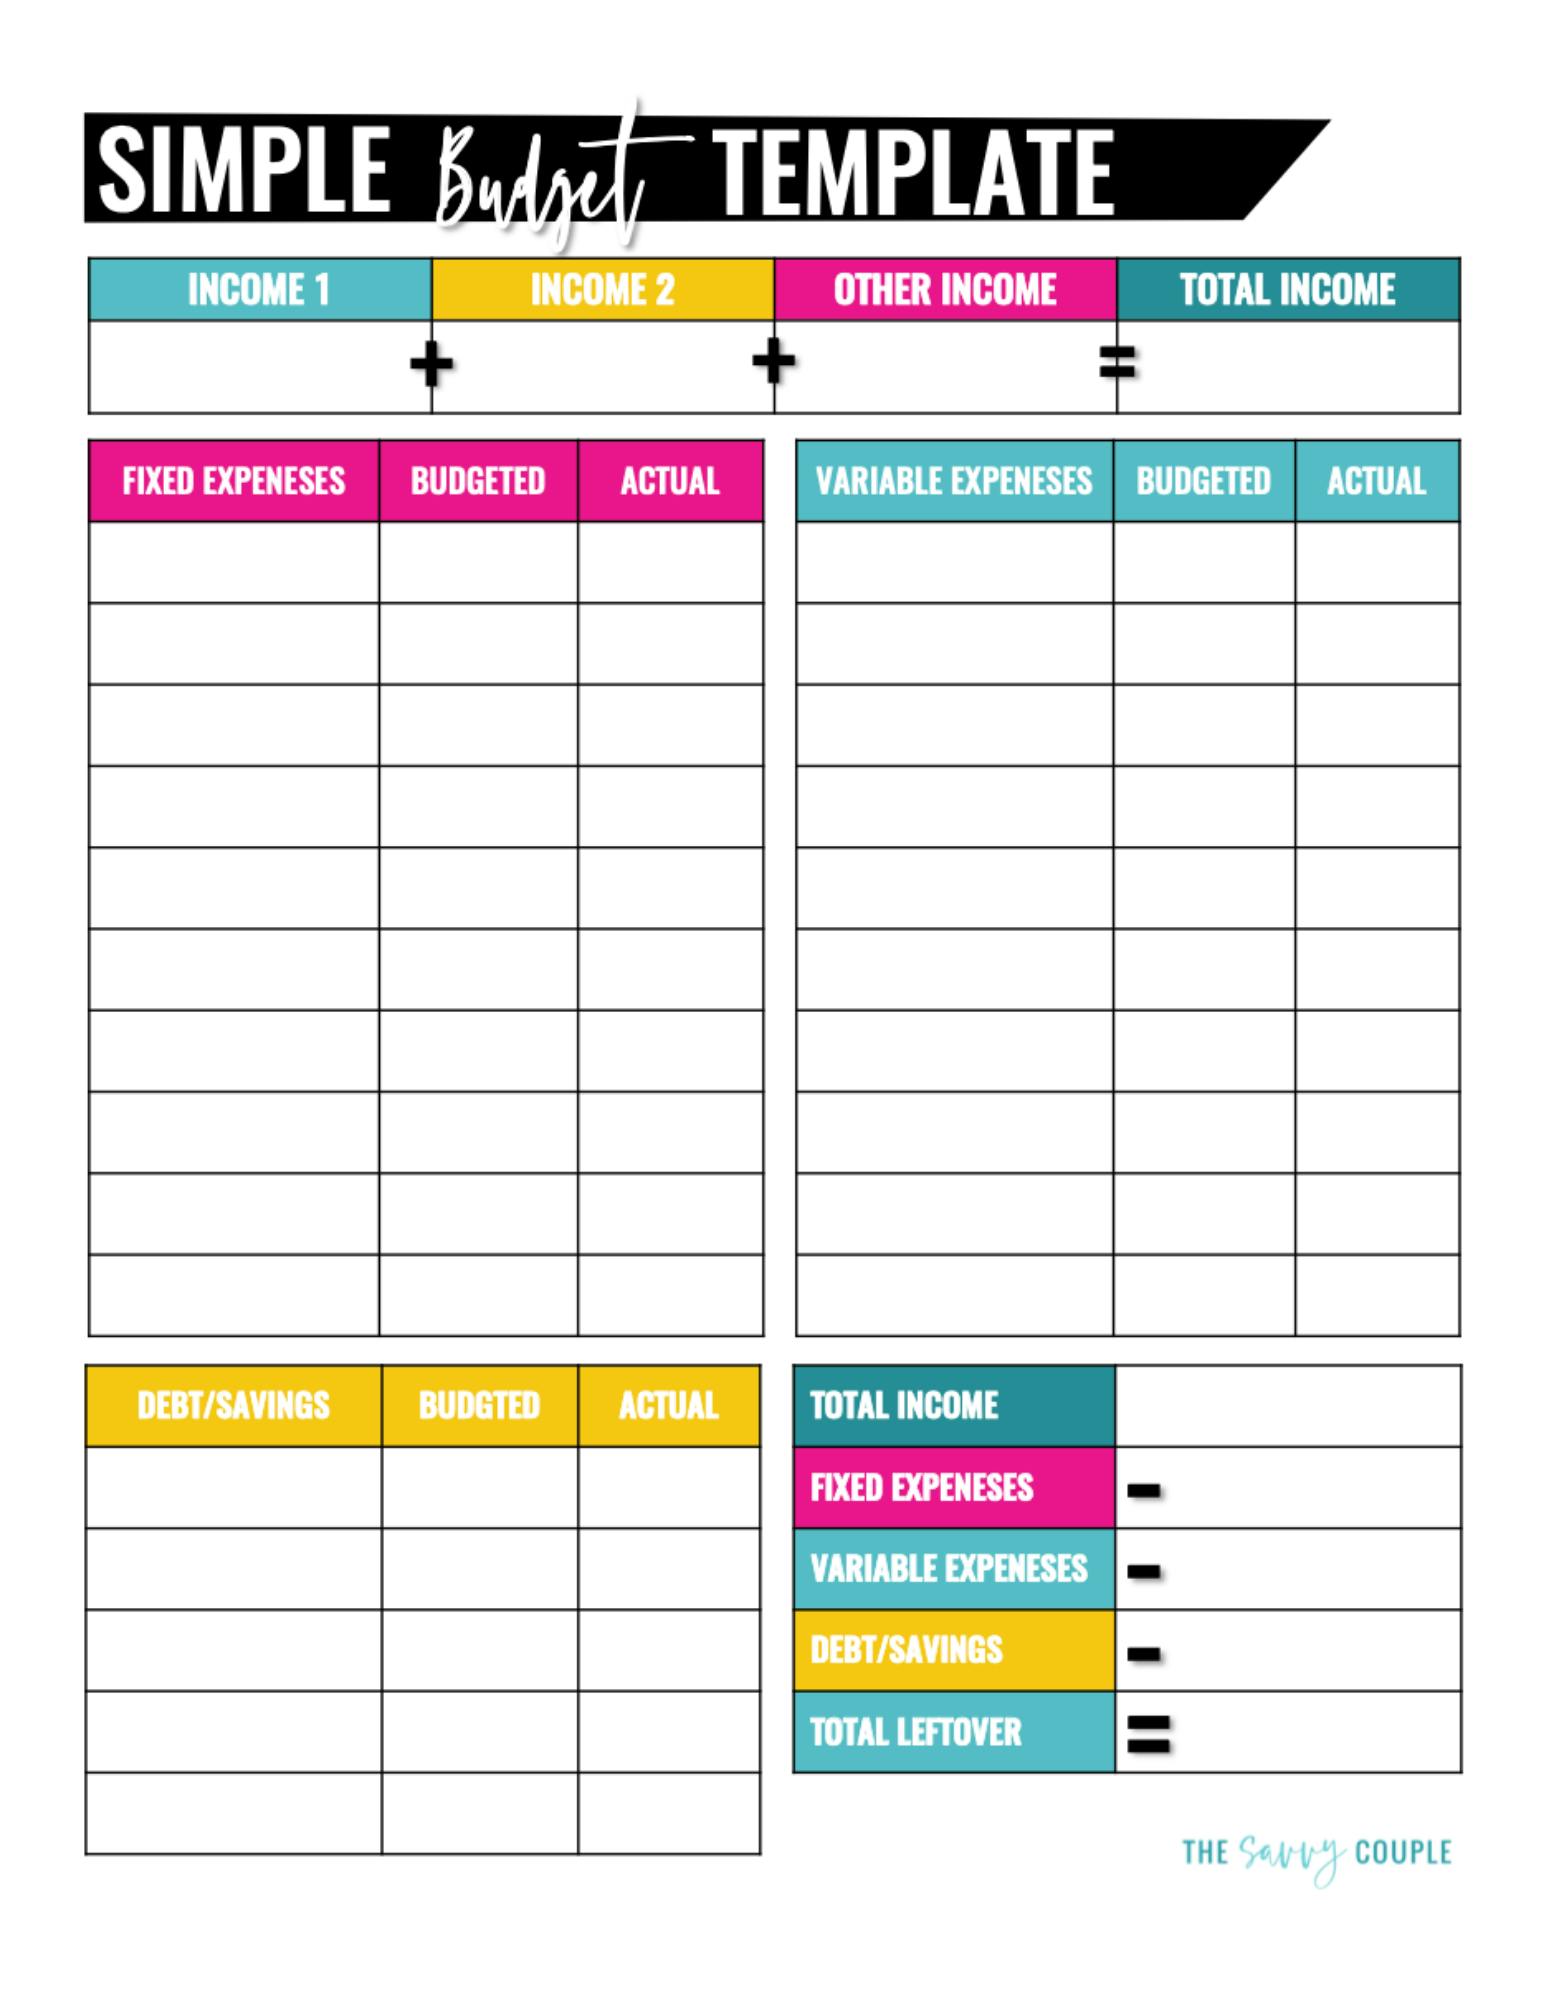 free-simple-monthly-budget-template